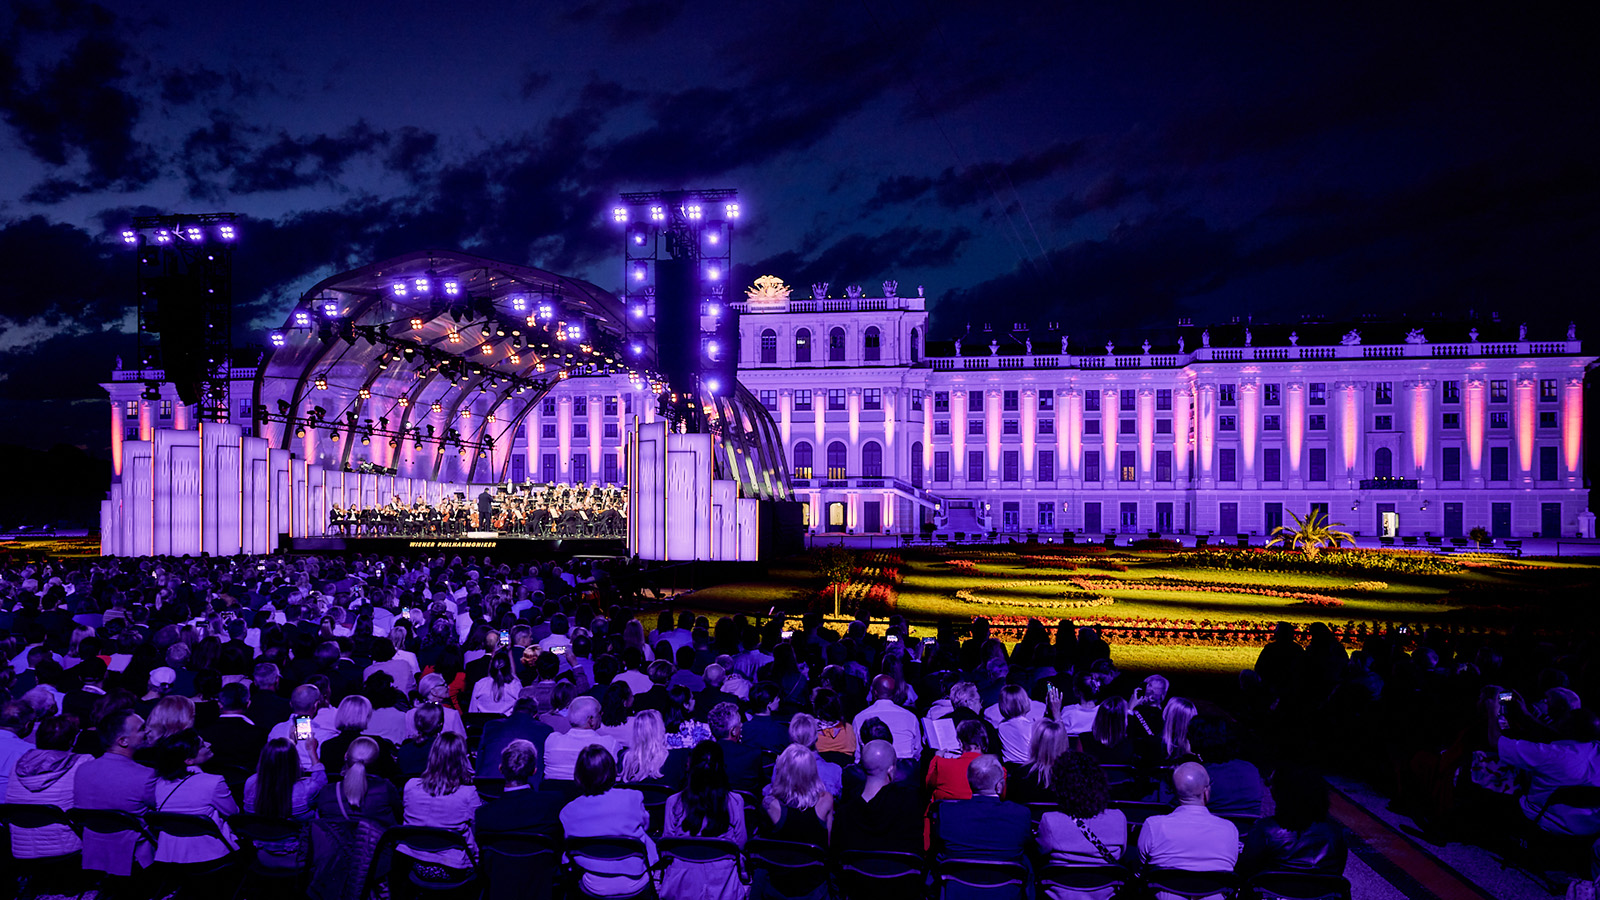 More than 260 GLP fixtures illuminate the stage, palace and park at the Summer Night Concert in Vienna